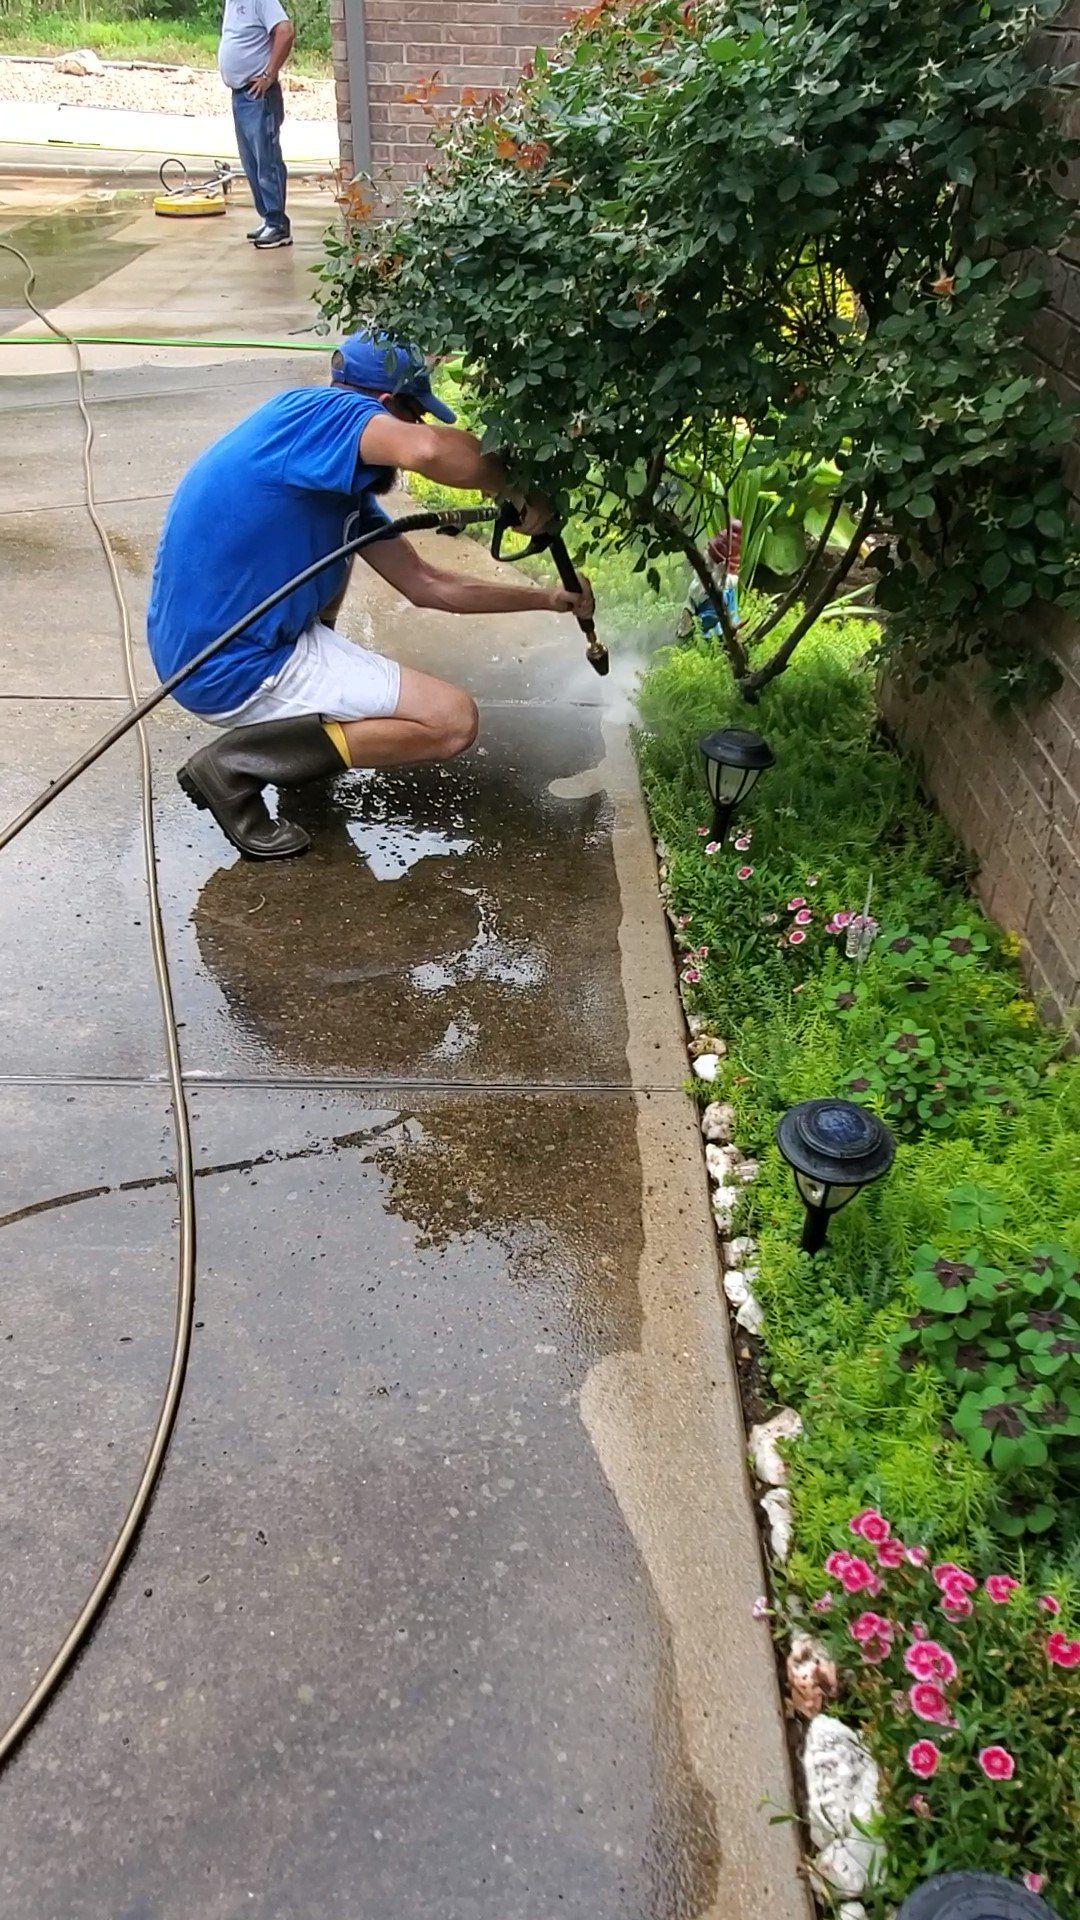 A man is cleaning the sidewalk with a pressure washer.